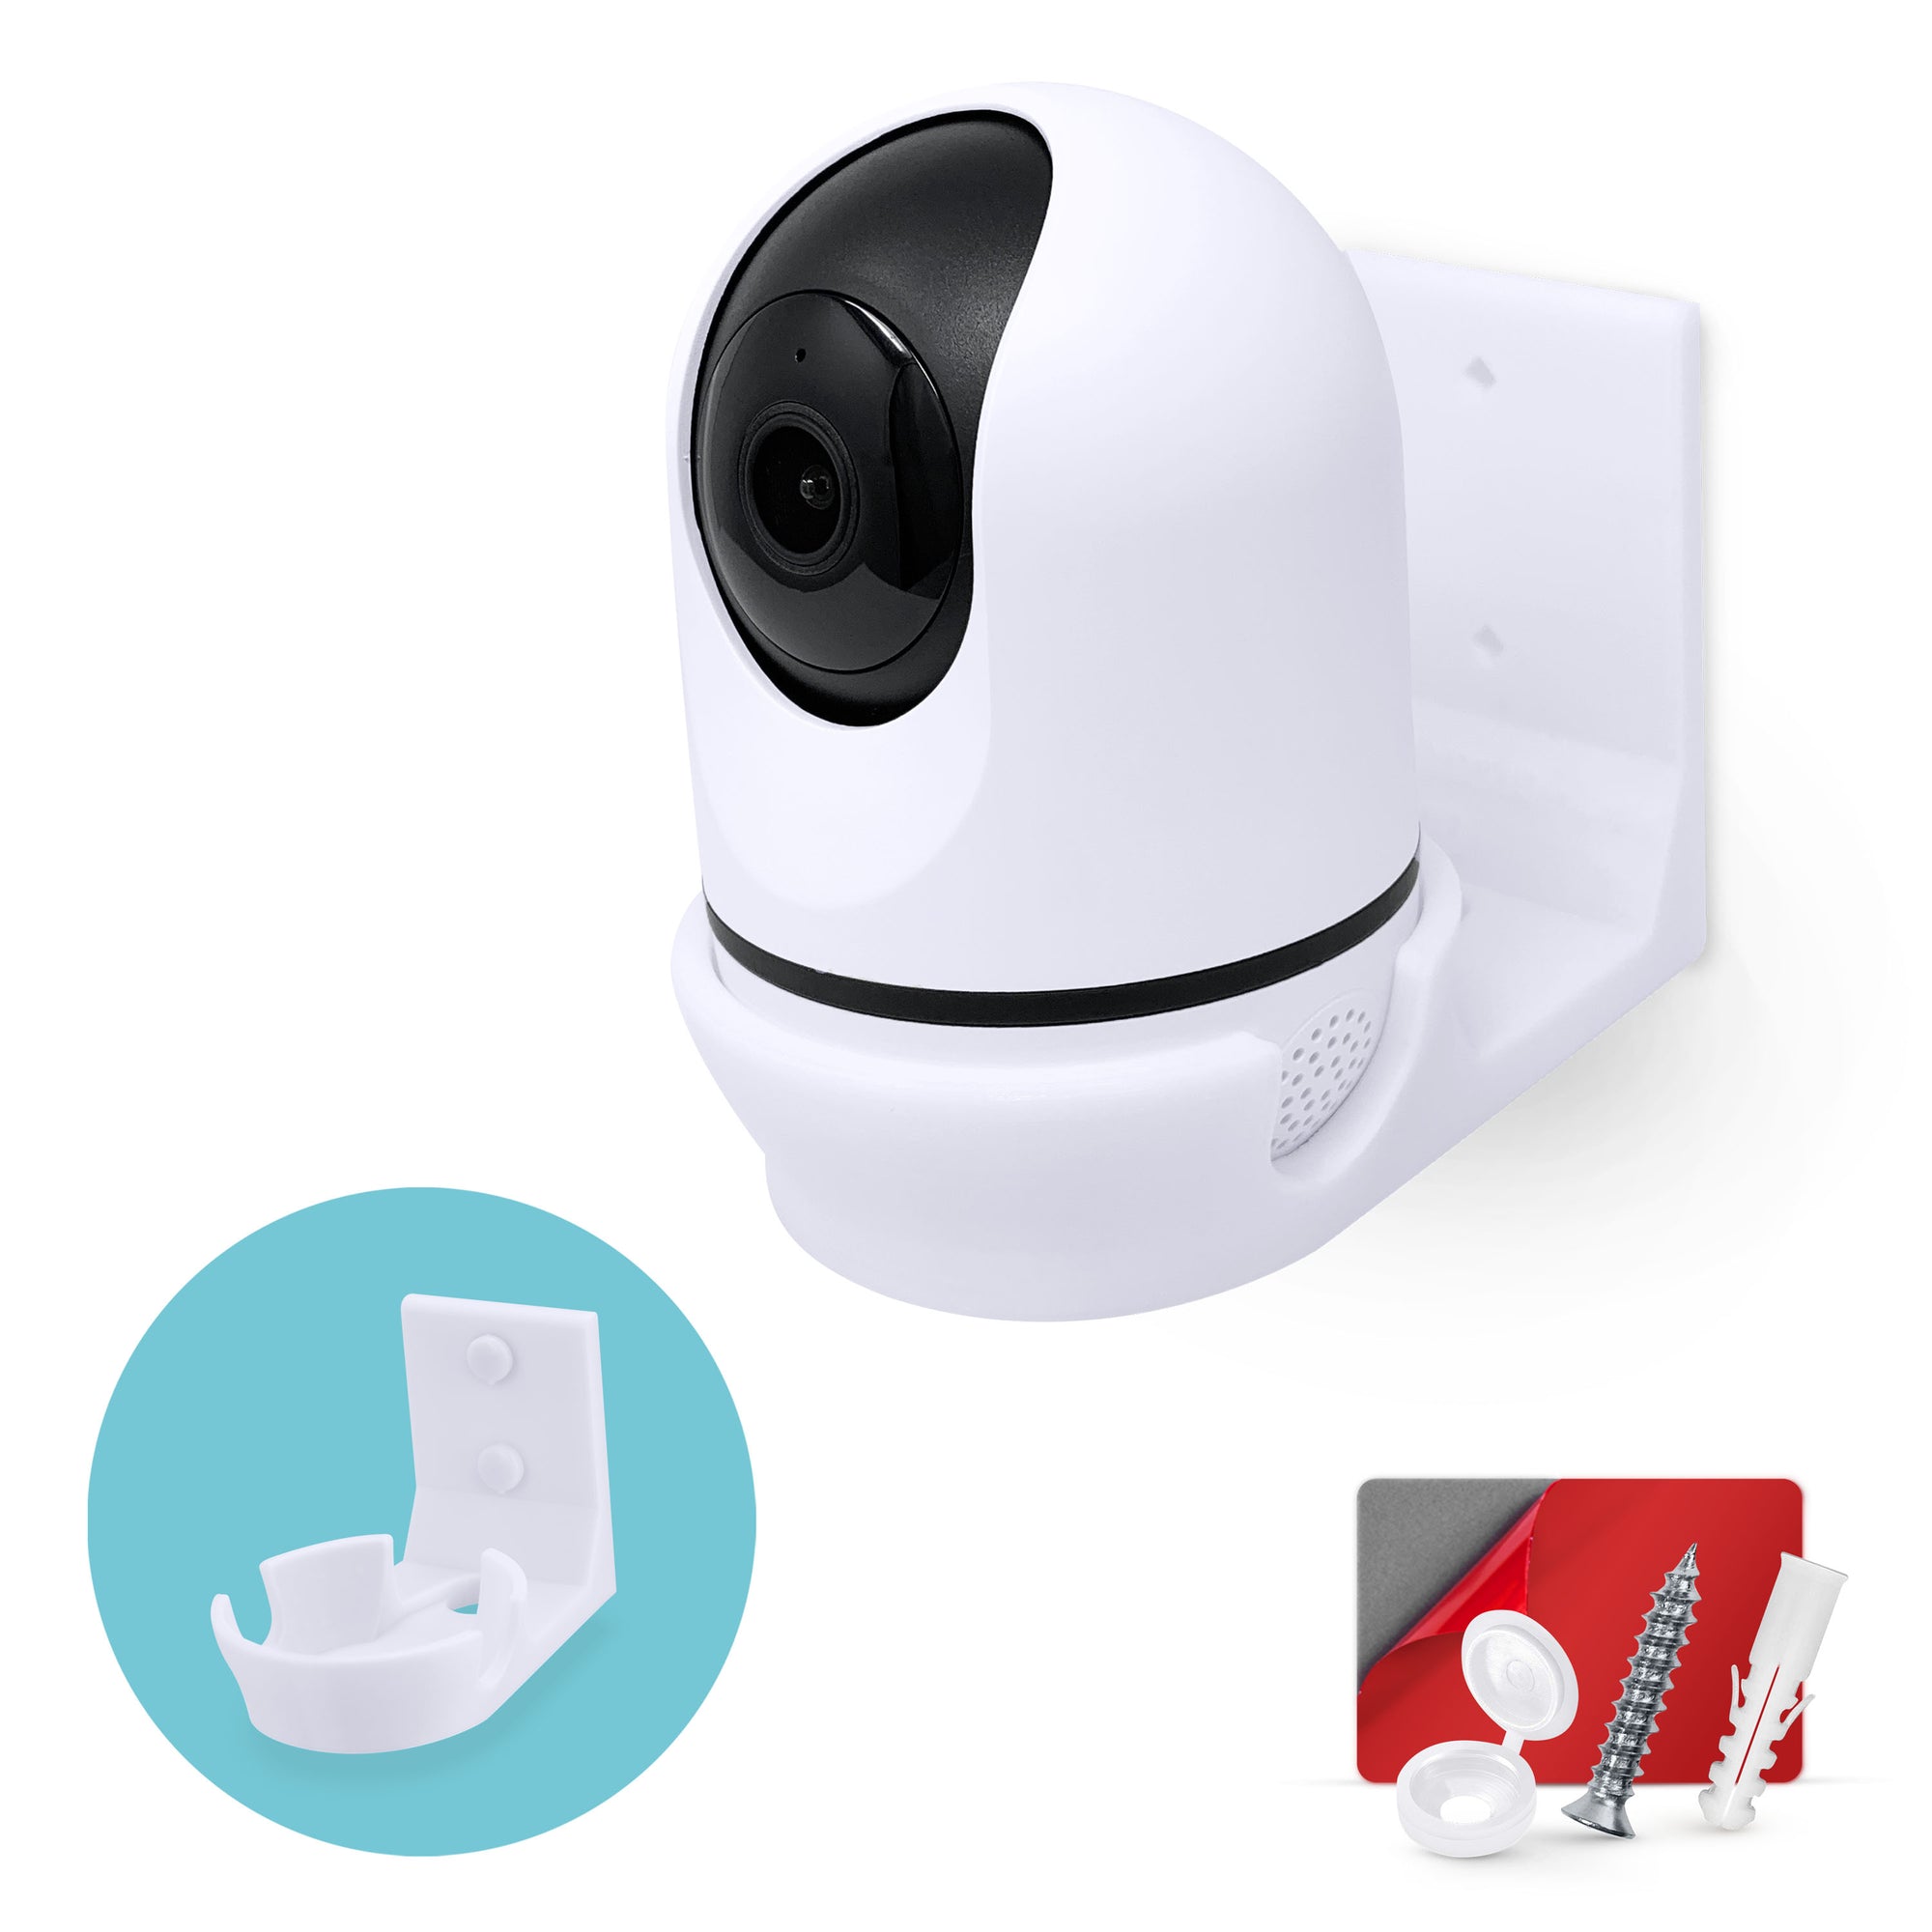 Wall Mount Compatible with WUUK Y0510 Security Camera - Adhesive & Screw for In Easy Installation, Reduce Blind Spots & Clutter